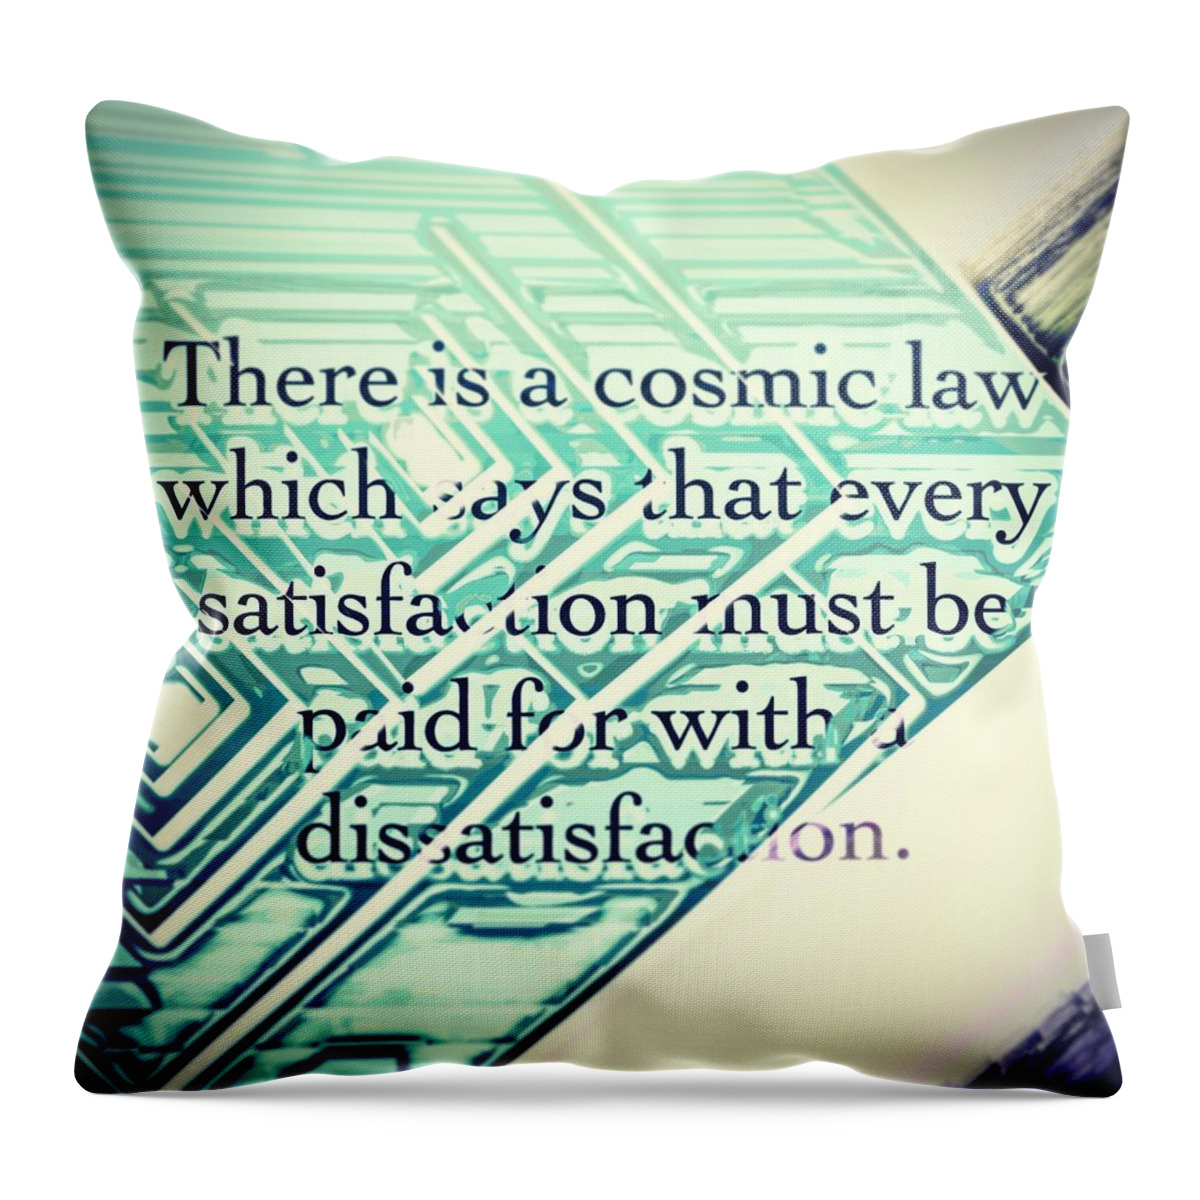 Quote Throw Pillow featuring the digital art There is a cosmic law by Marko Sabotin